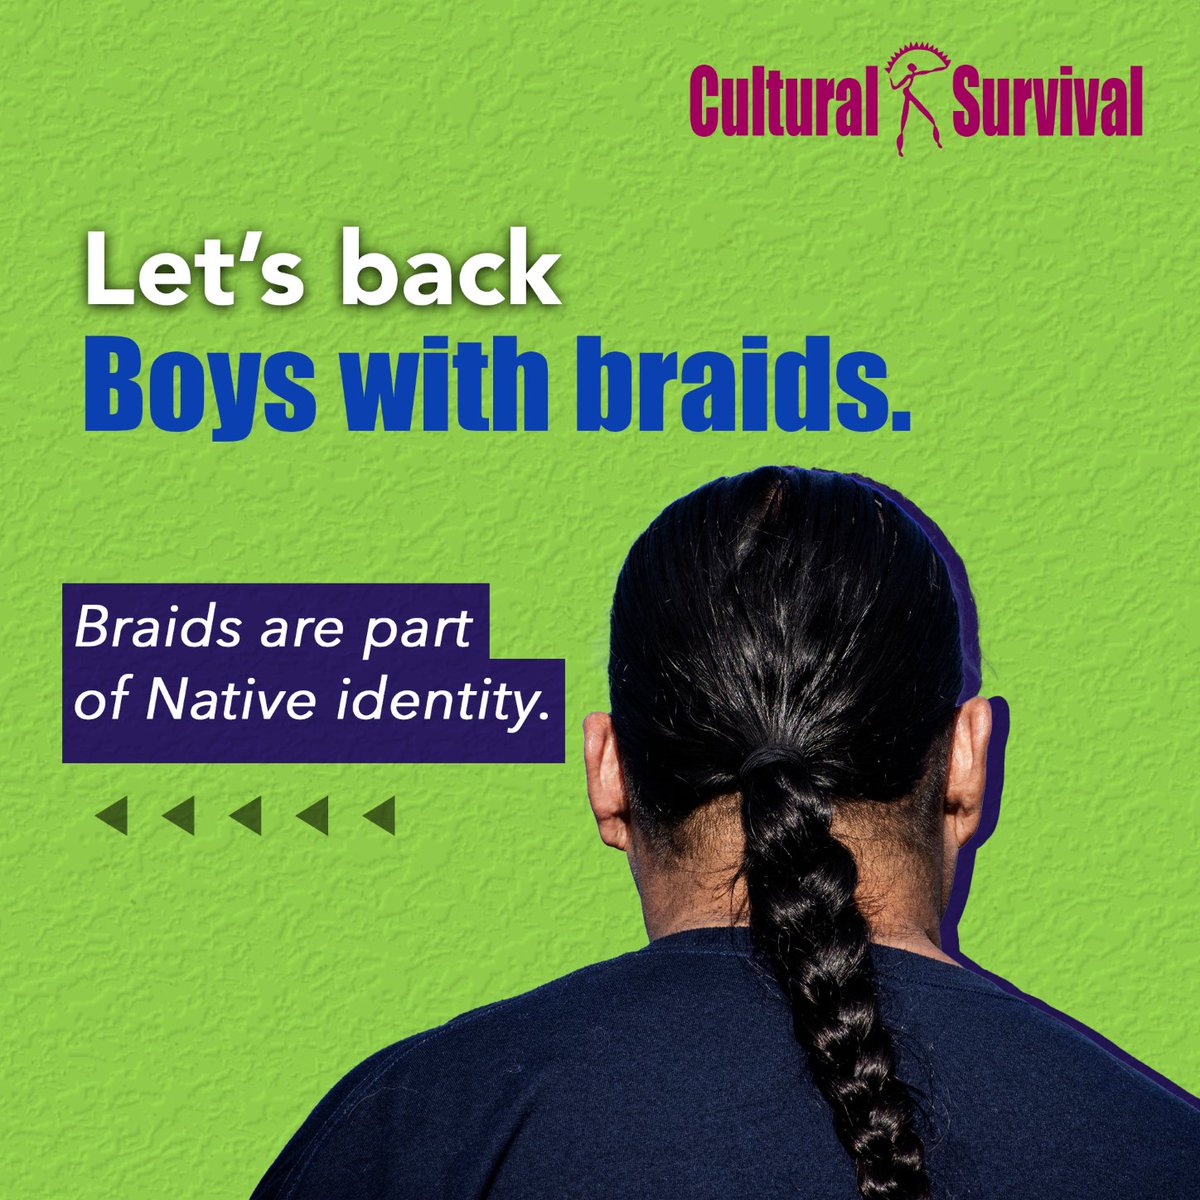 It's back to school for many children. It's also time to stand with boys with braids. Braids are part of Native identity and culture. #IndigenousYouthRising #CulturalSurvival #Proud2BIndigenous #Stopbullying